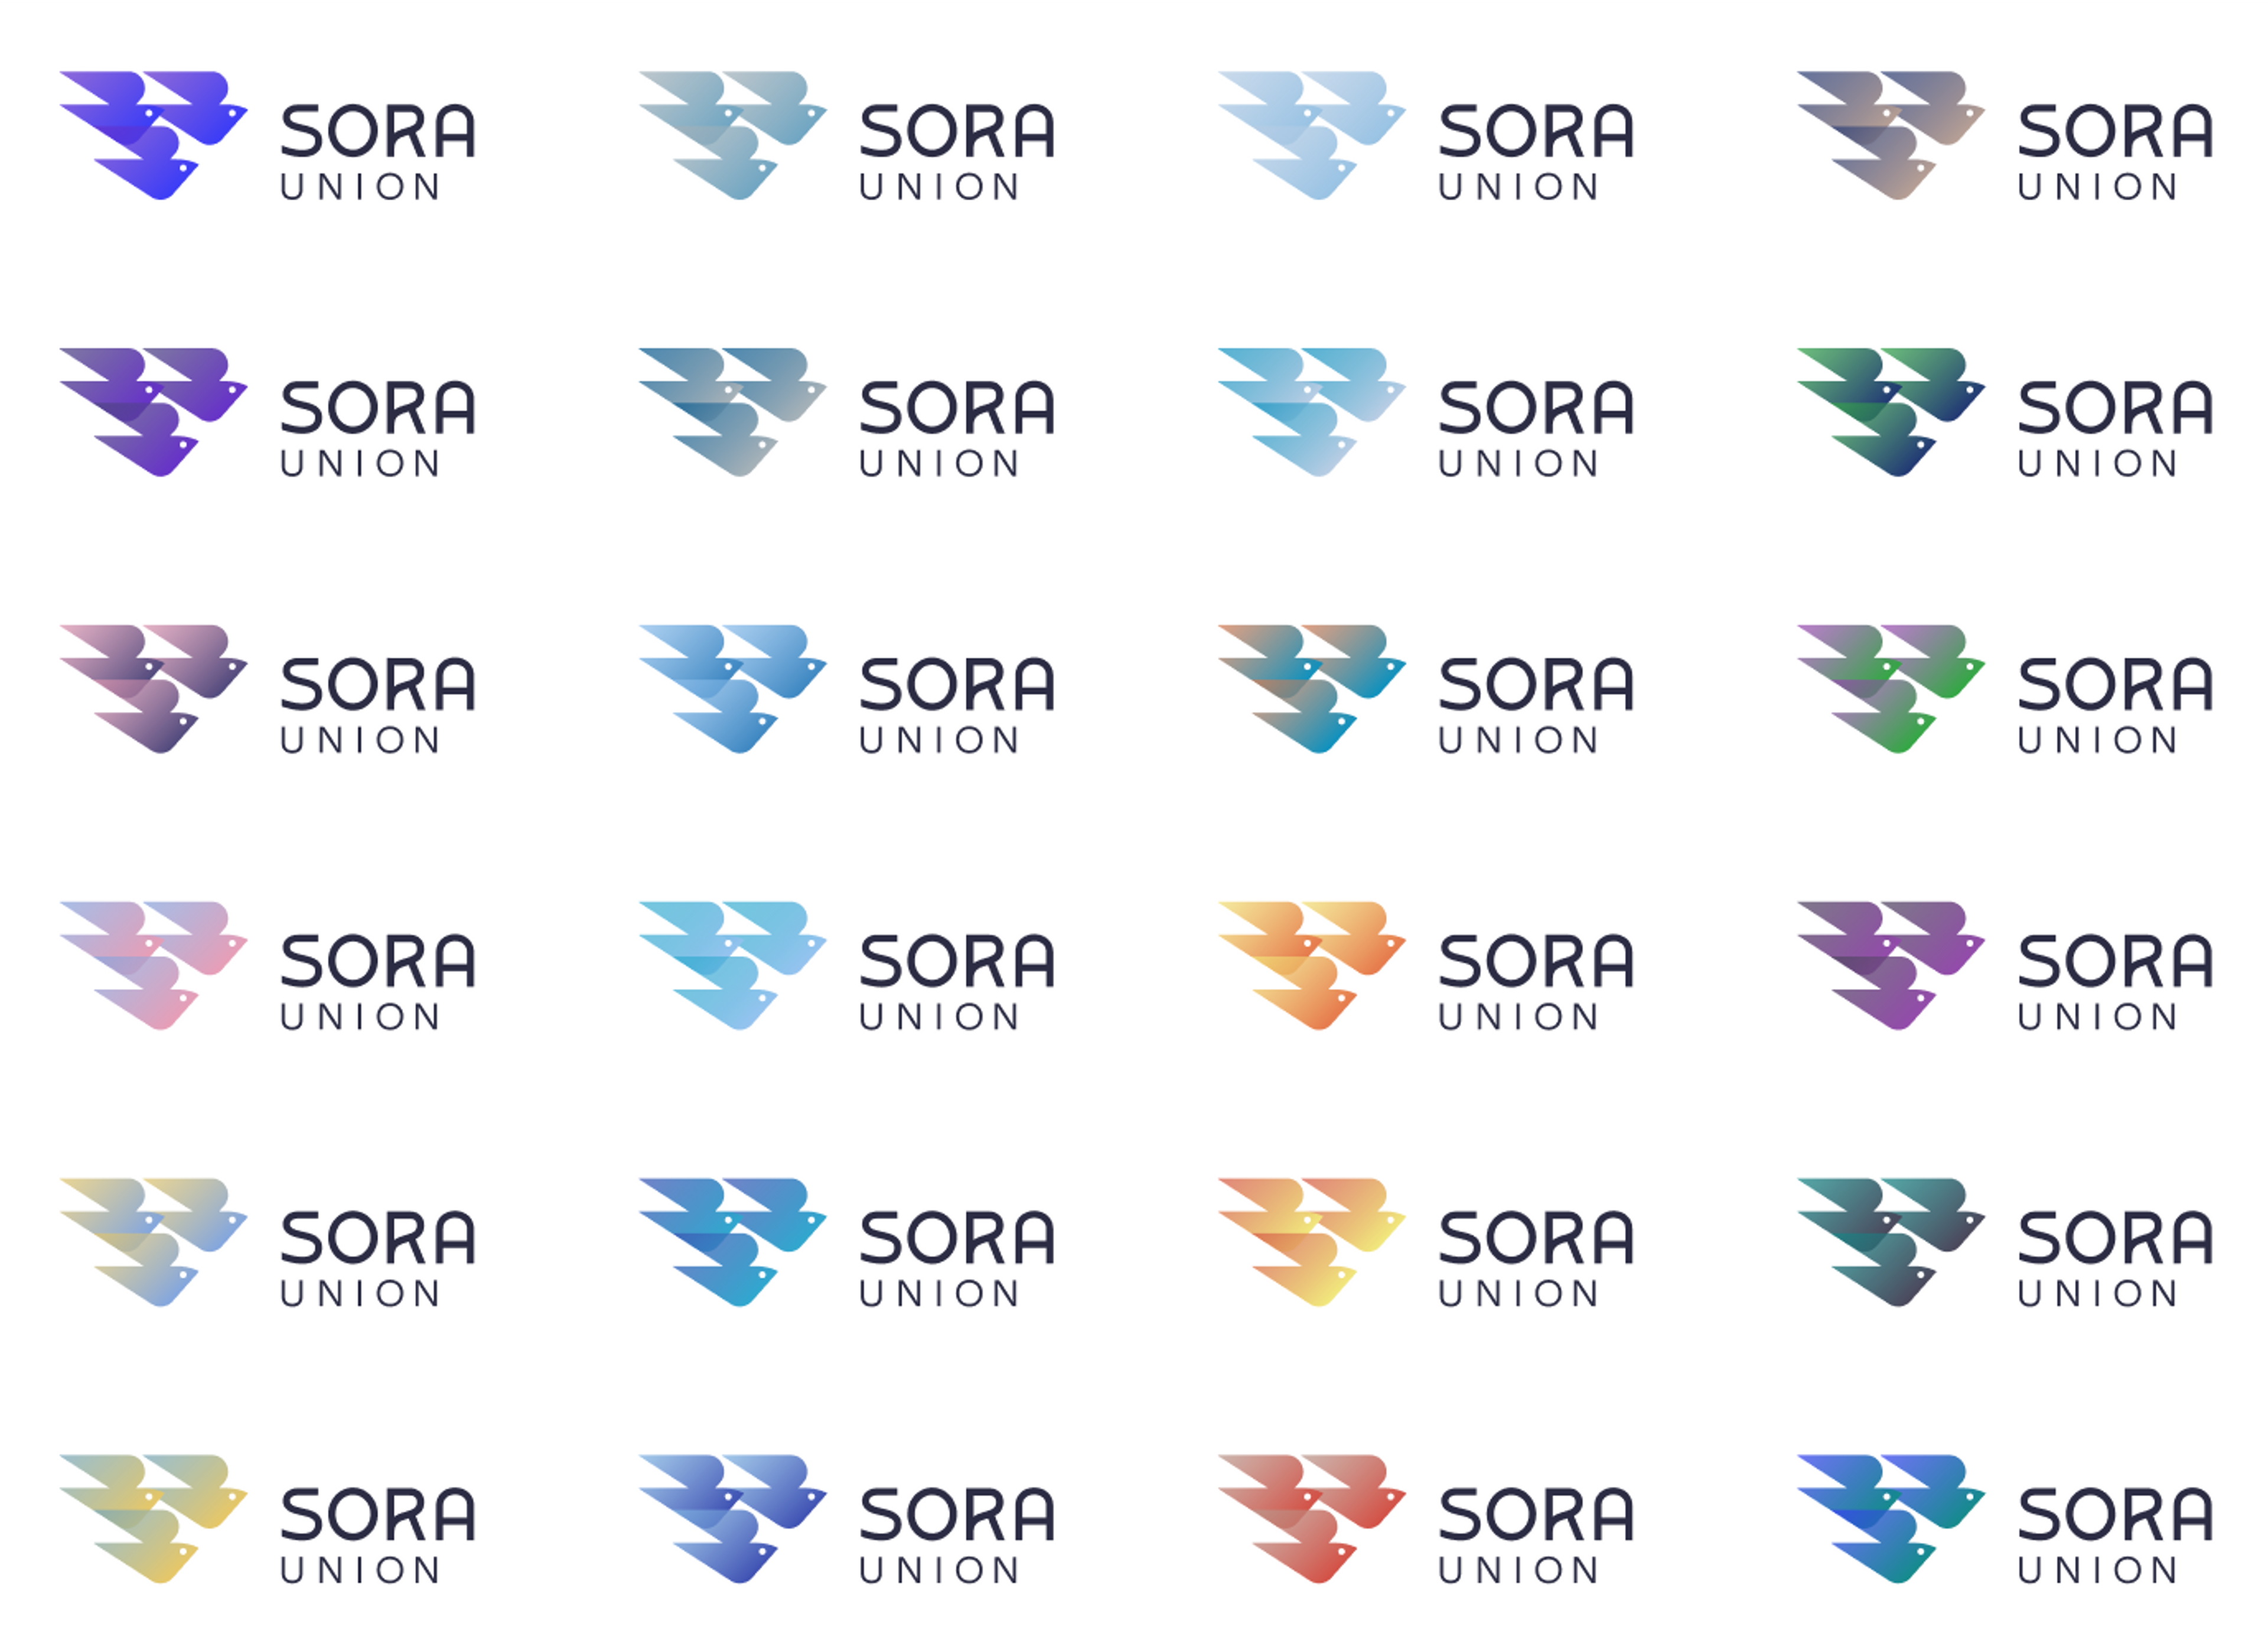 The 24 Sora Union logos using the 24-hour color system; each has the three-bird logo in the hour's gradient with Sora Union in dark text